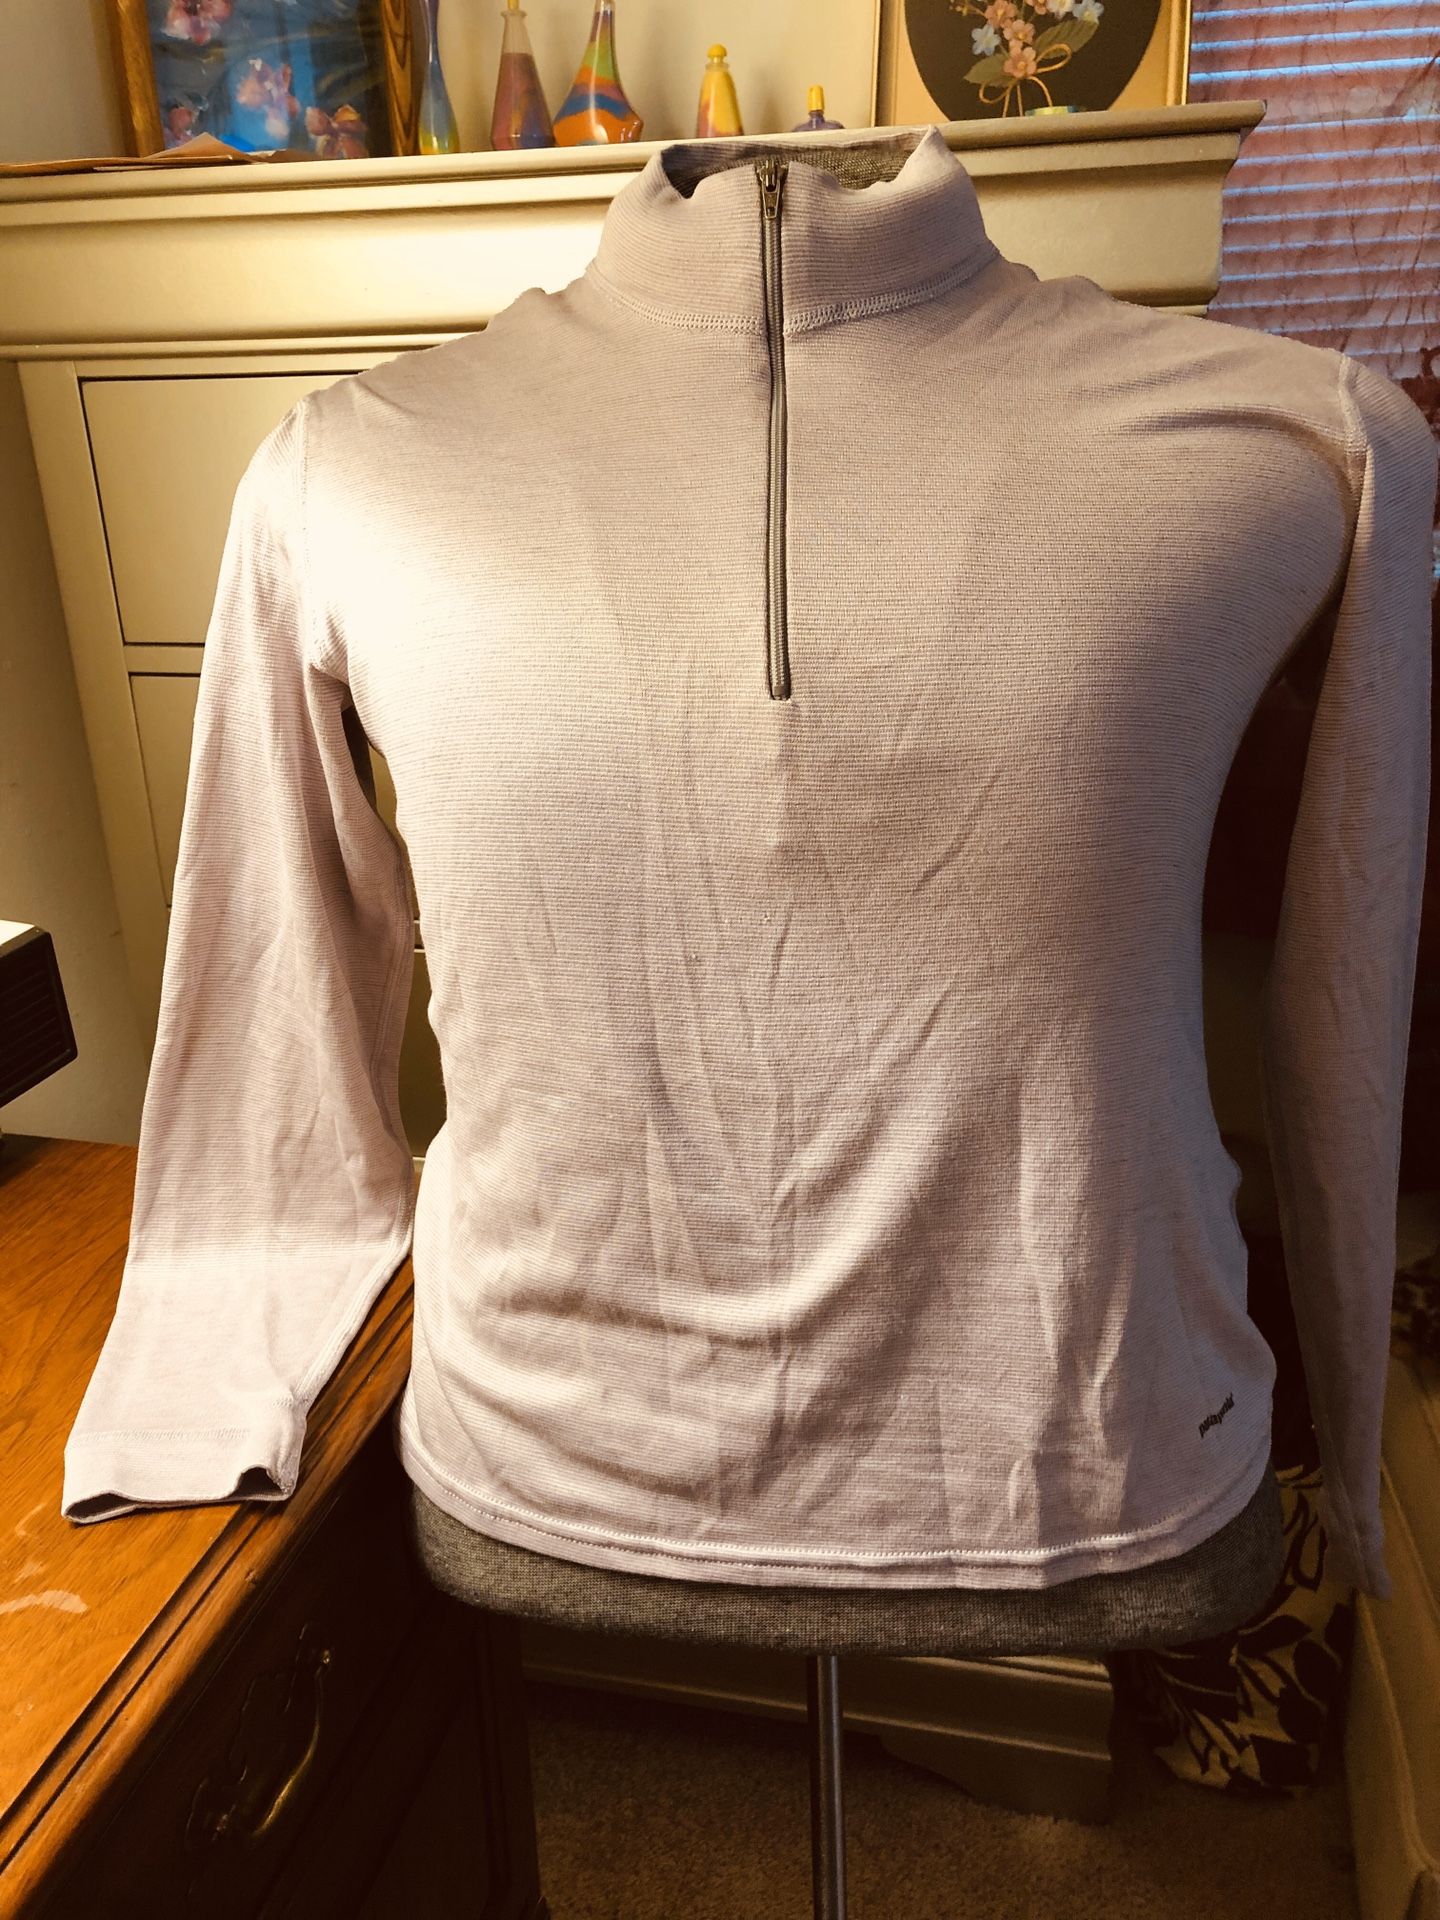 Patagonia long sleeve shirt for women size s,